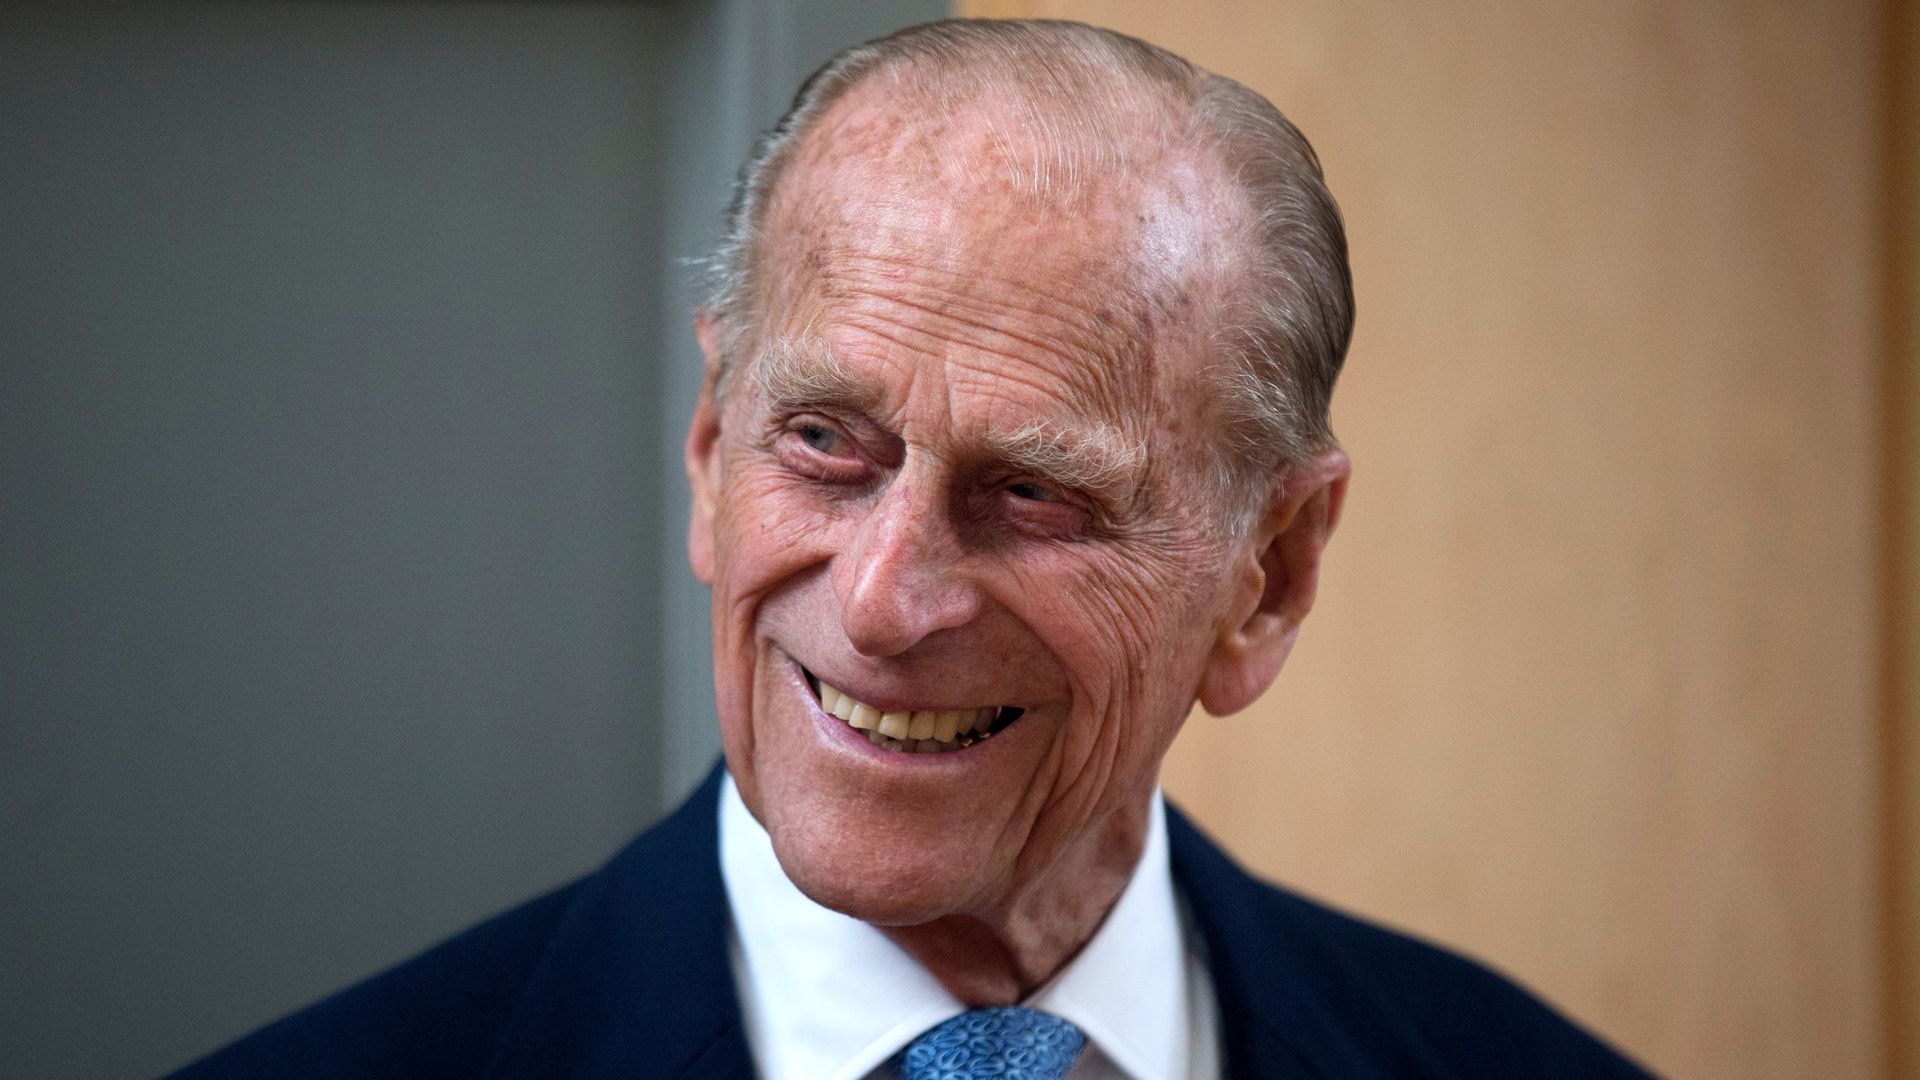 Prince Philip smiling and looking to the left